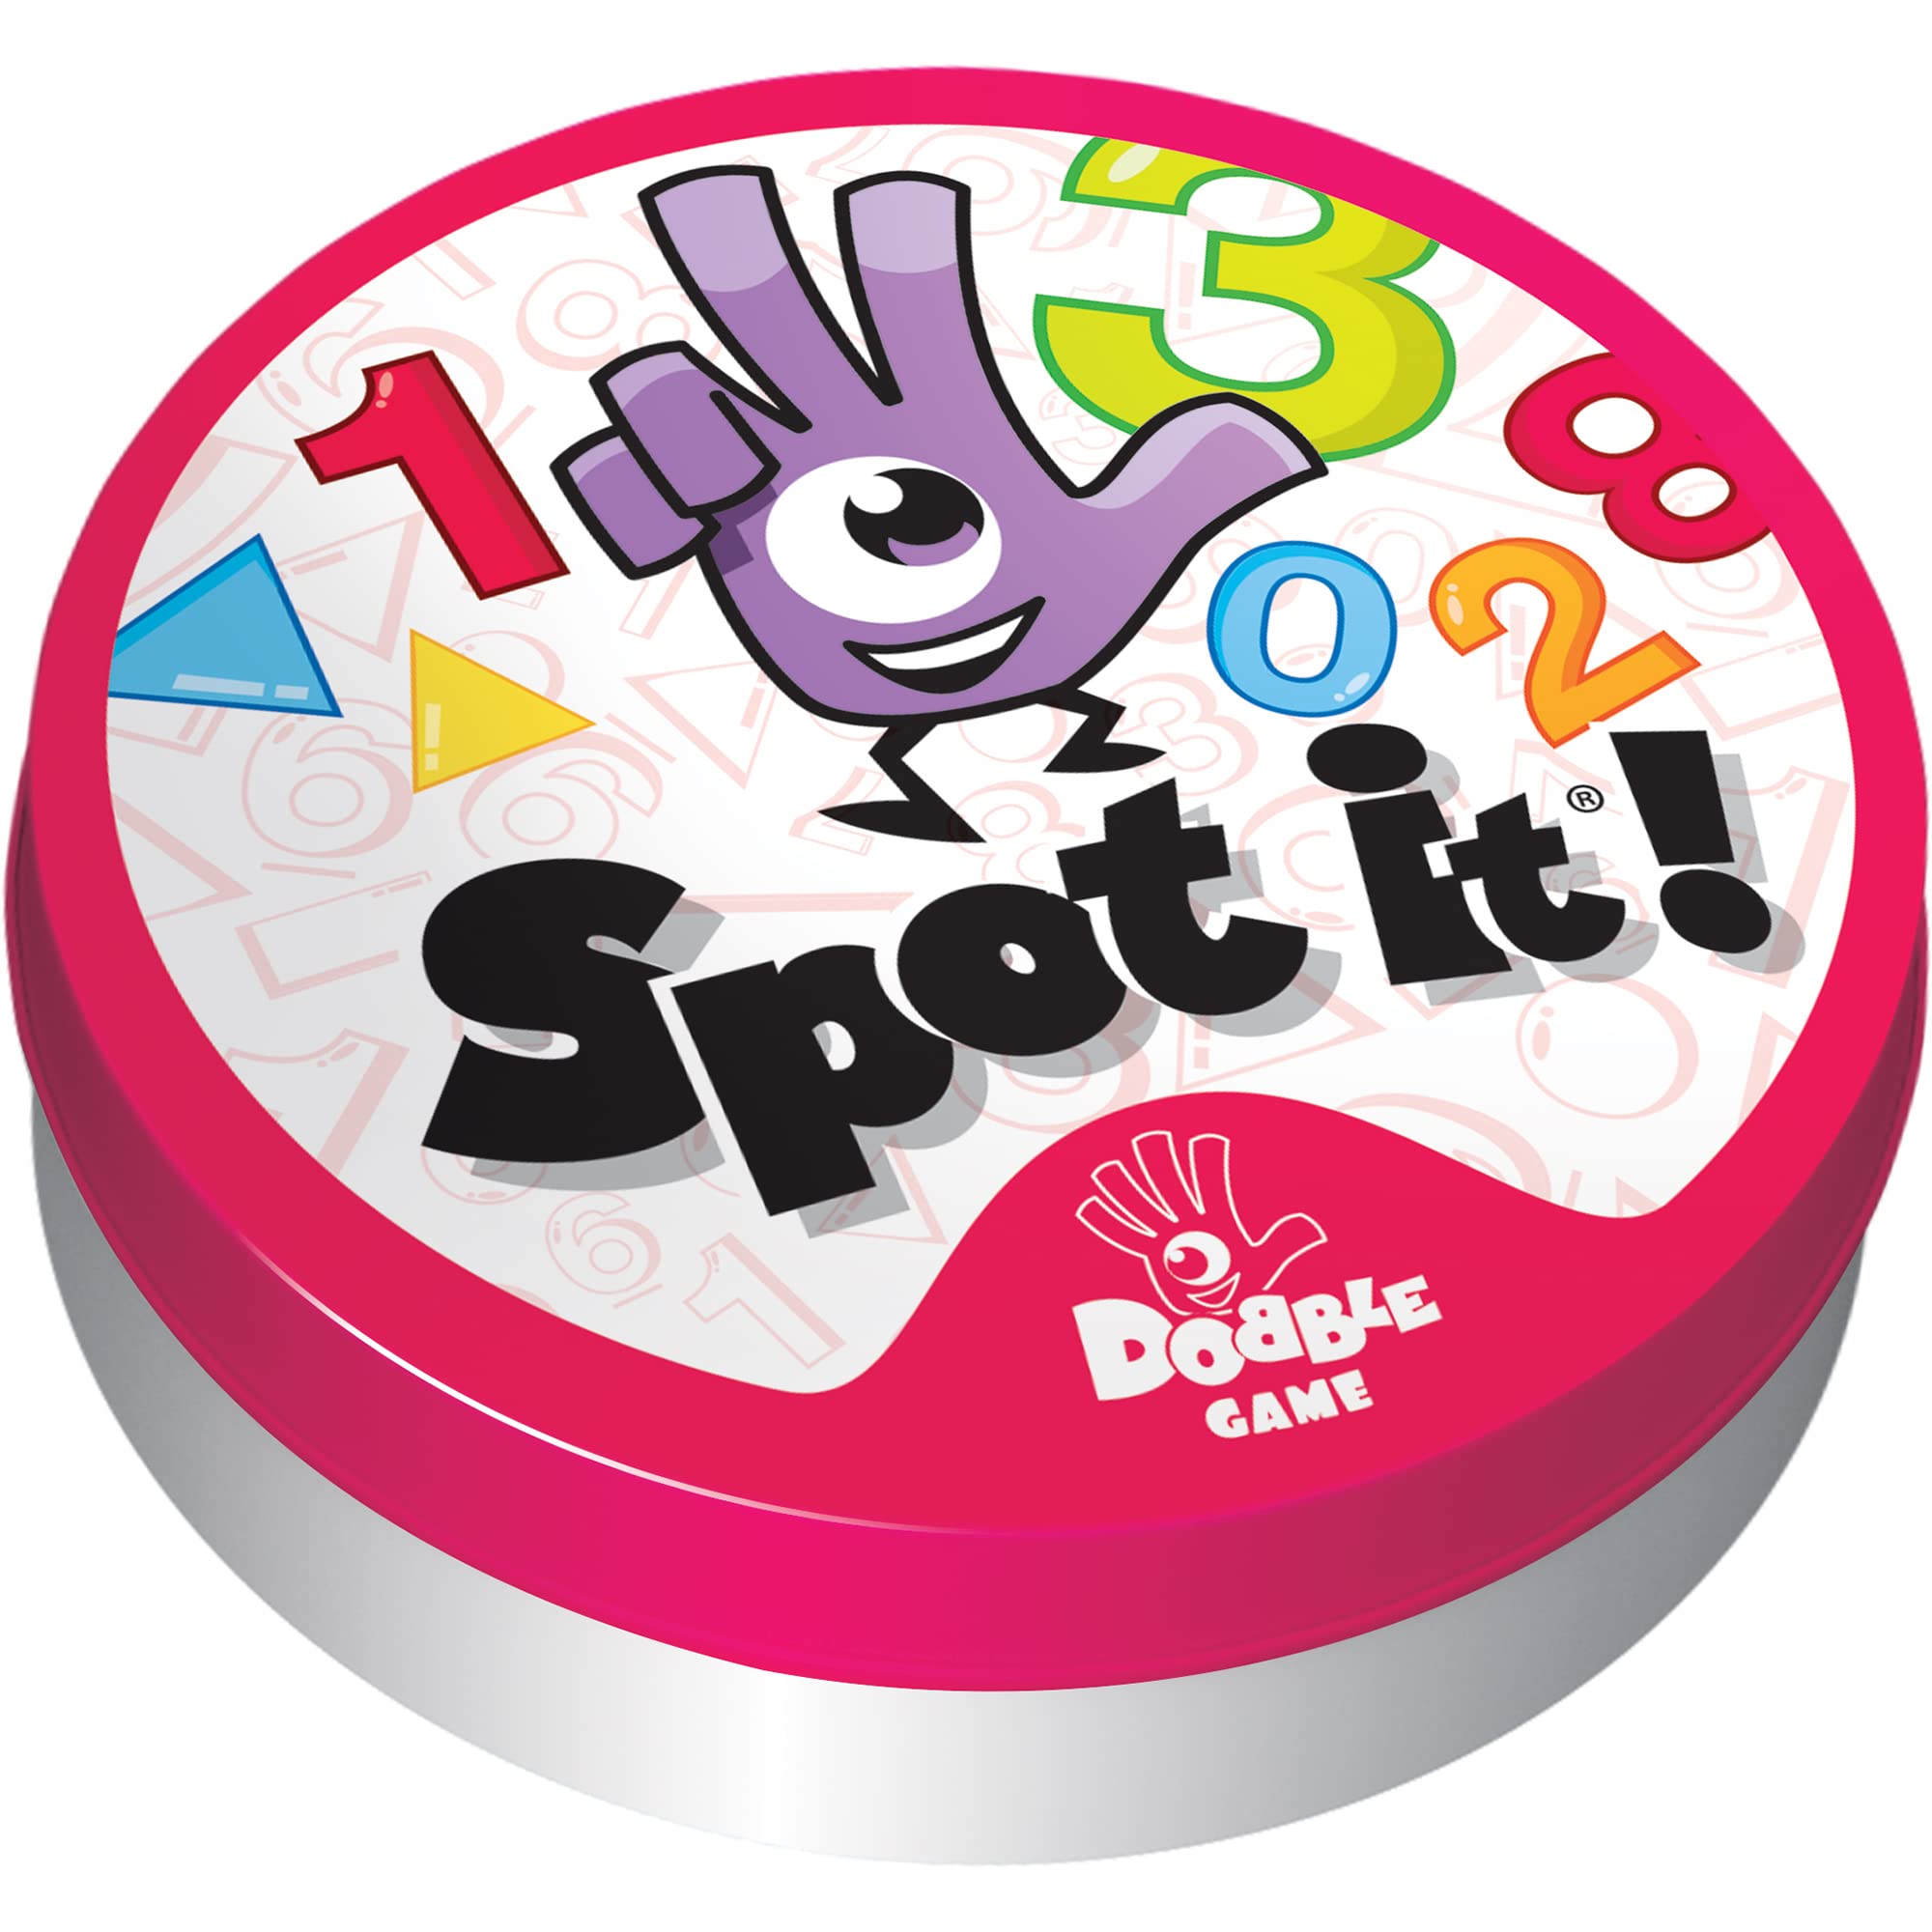 Spot It! 1,2,3 Card Game (Eco-Blister)| Matching Game | Fun Kids Game for Family Game Night | Travel Game for Kids | Great Kids Gift | Ages 3+ | 1-5 Players | Avg. Playtime 10 Mins | Made by Zygomatic